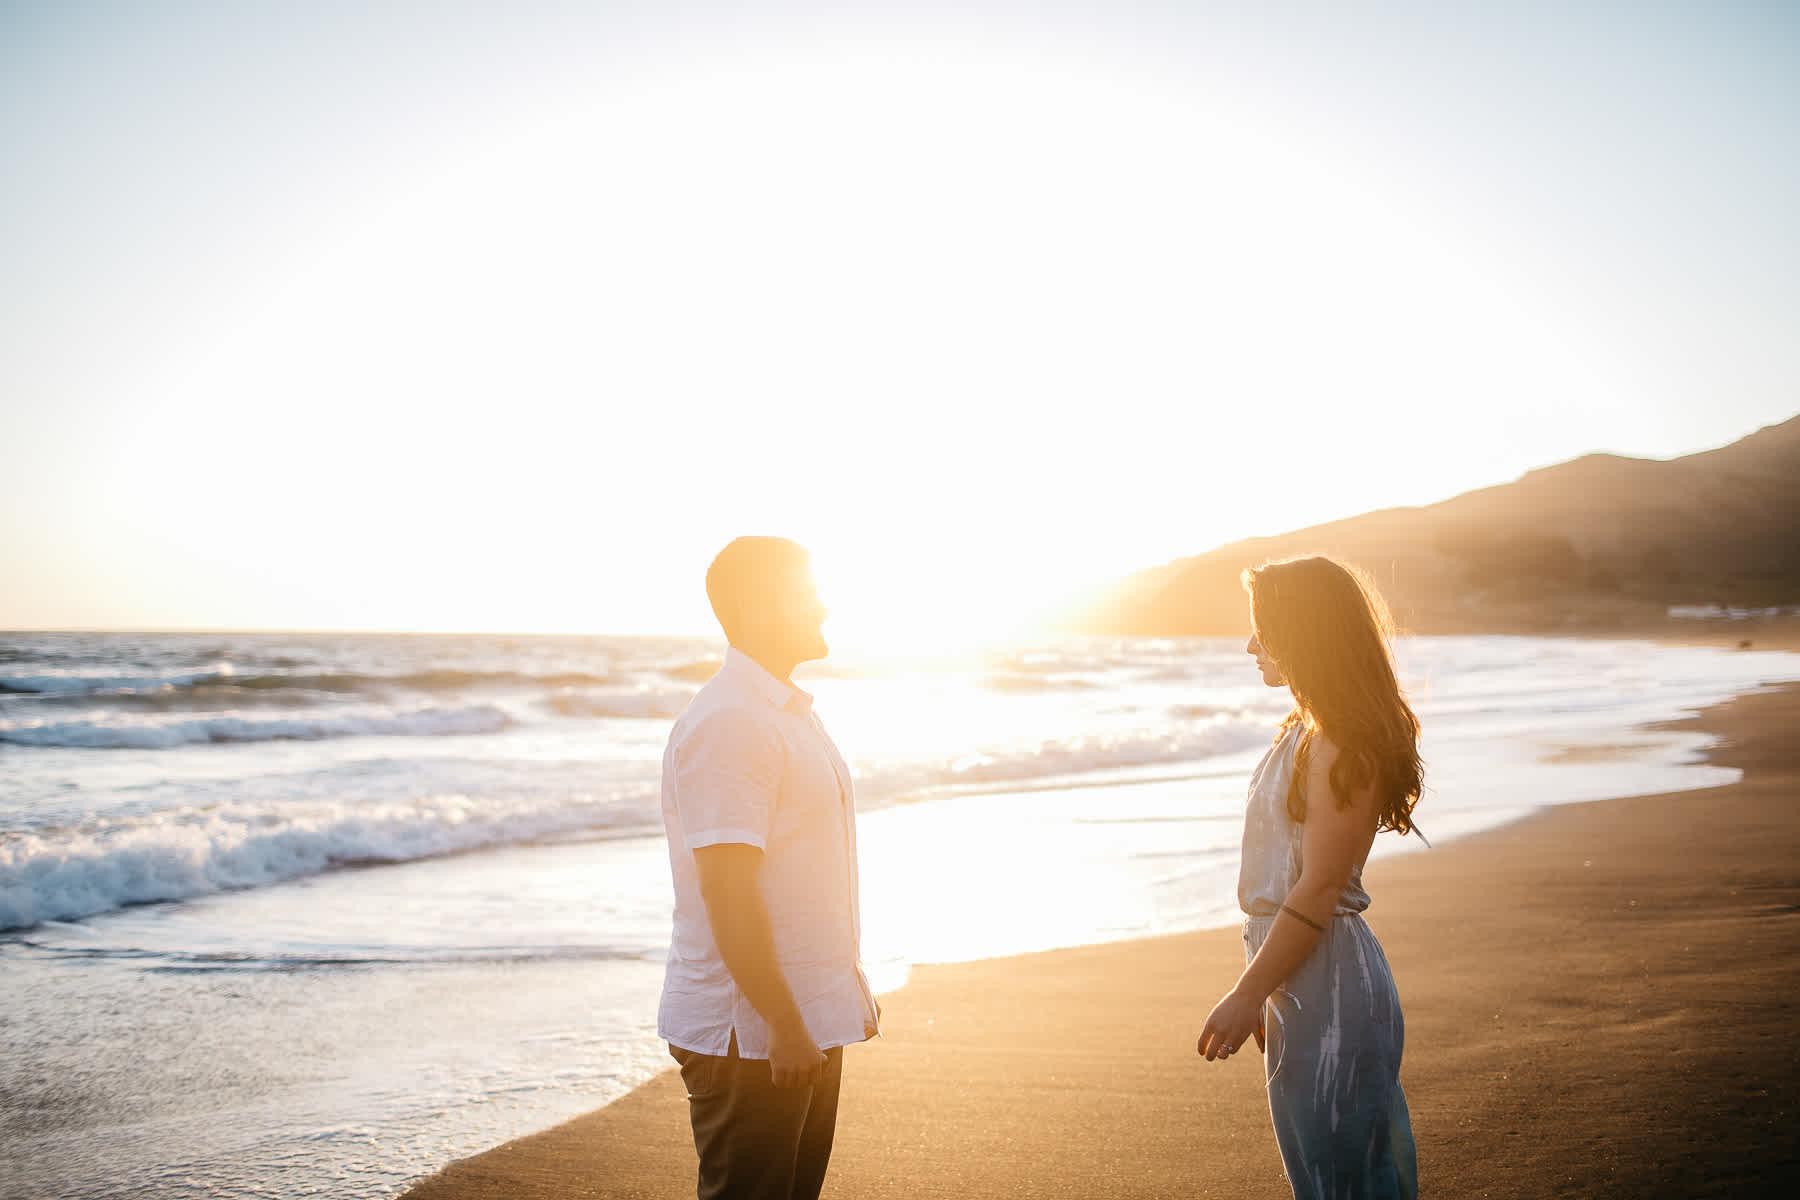 marin-headlands-rodeo-beach-lifestyle-laughter-engagement-session-51